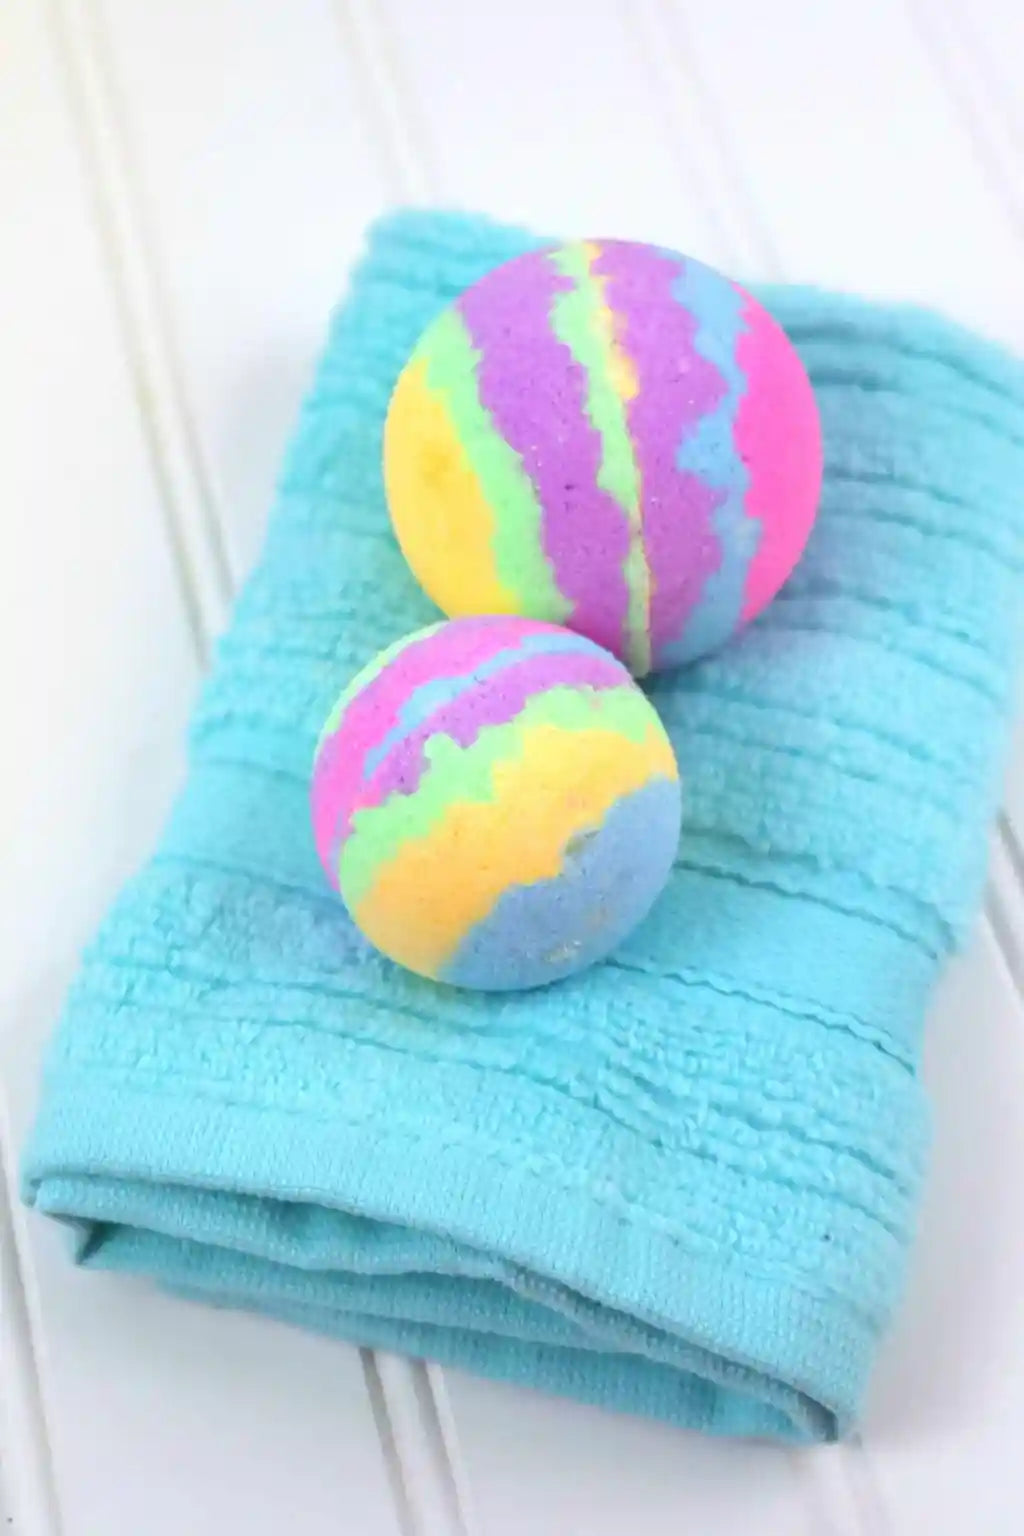 Fizzy Fun - Bath Bombs & Silly Soaps: Wednesday, August 16 | 9:00 AM - 12:00 PM | 2:00 PM - 5:00 PM